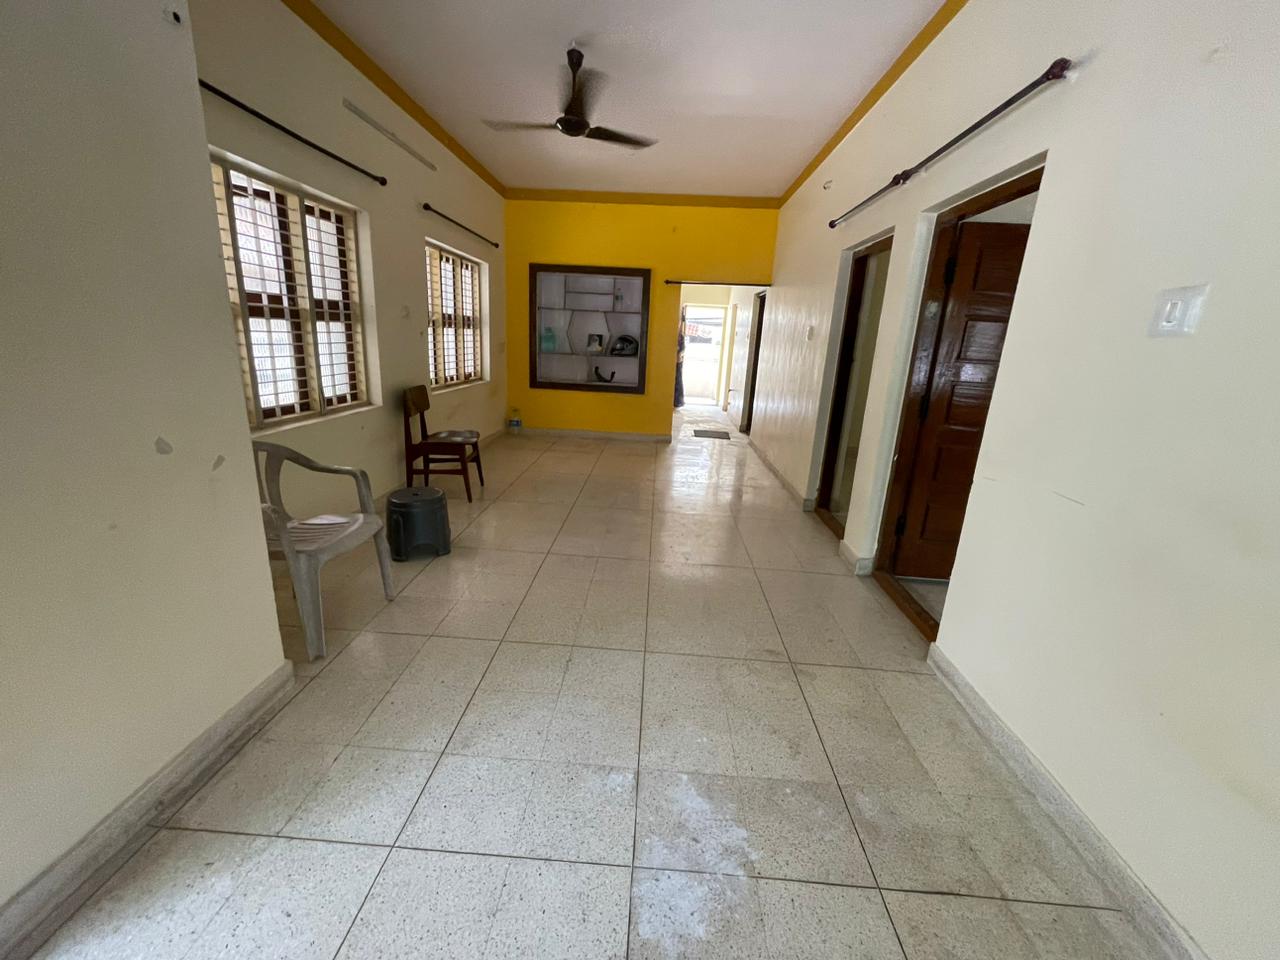 2 BHK Independent House for Lease Only at JAML2 - 4058 in Challakere